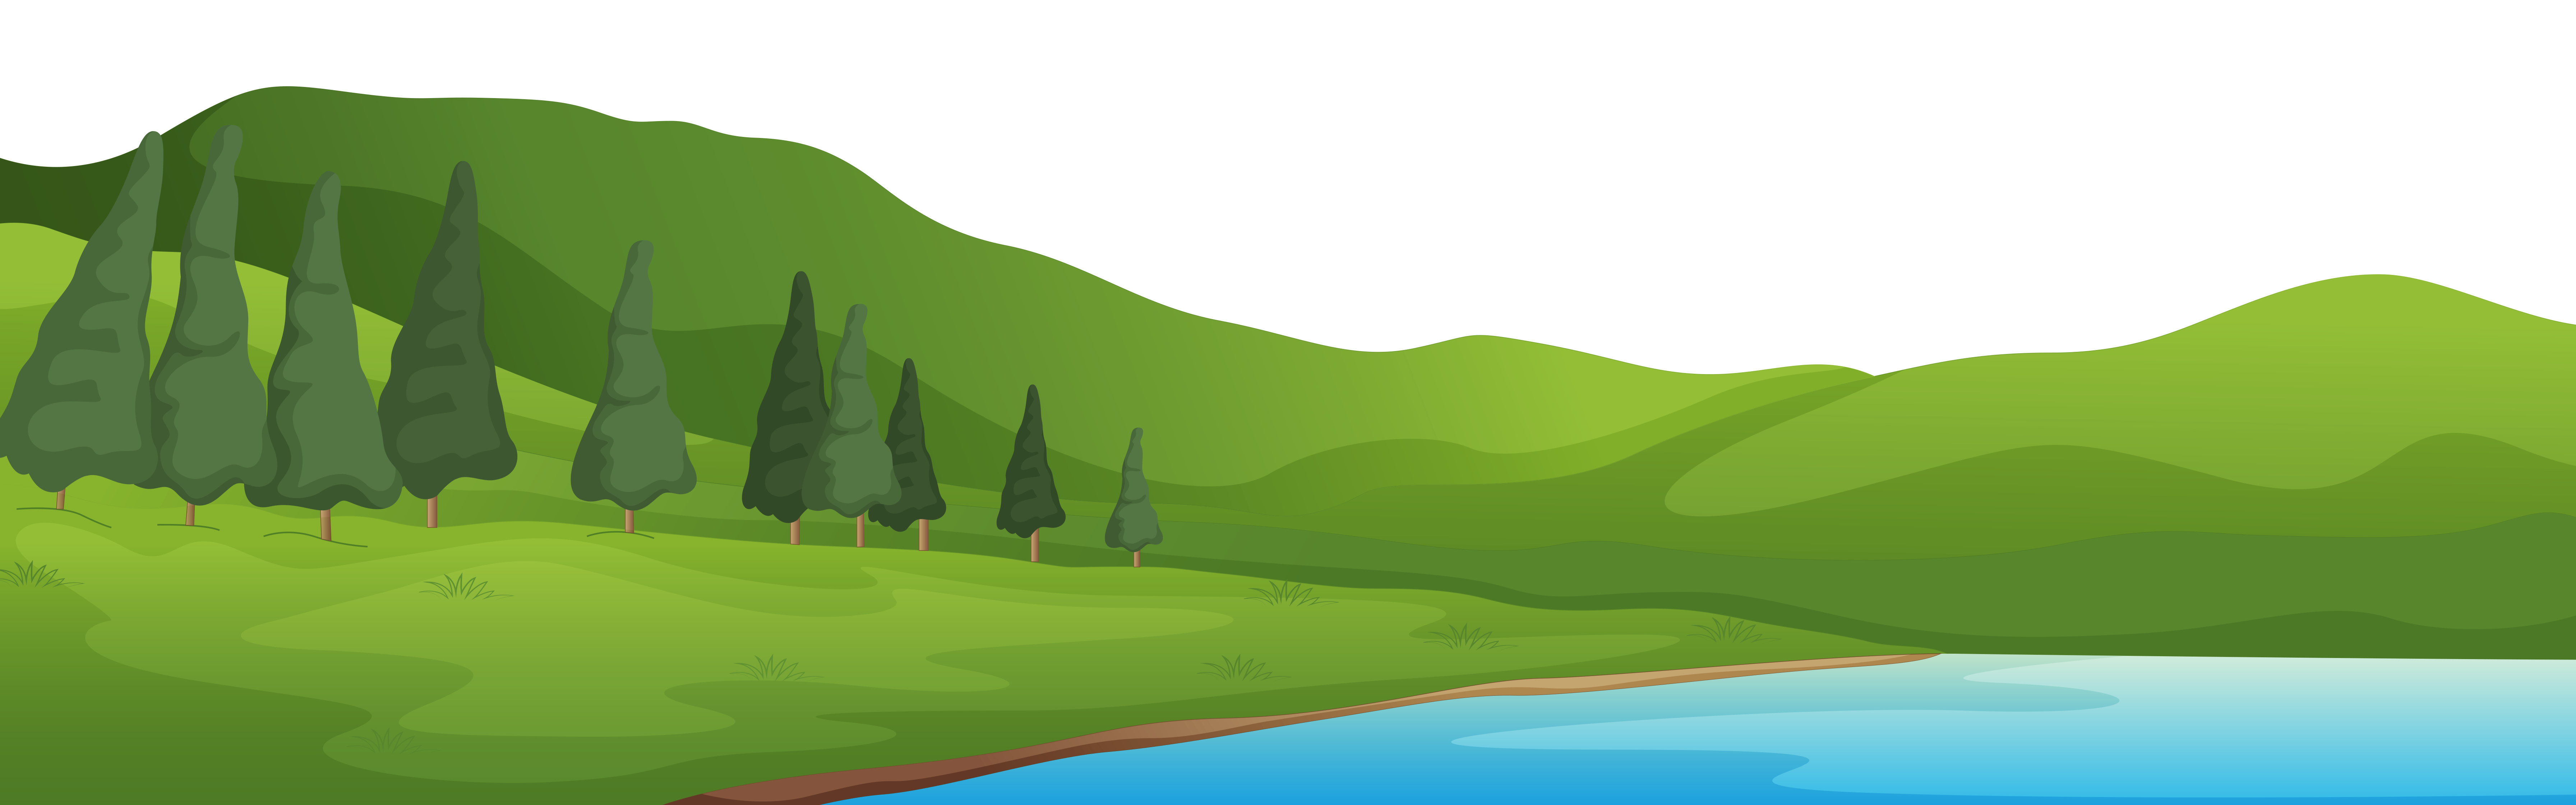 Mountain and lake png. Trail clipart green ground